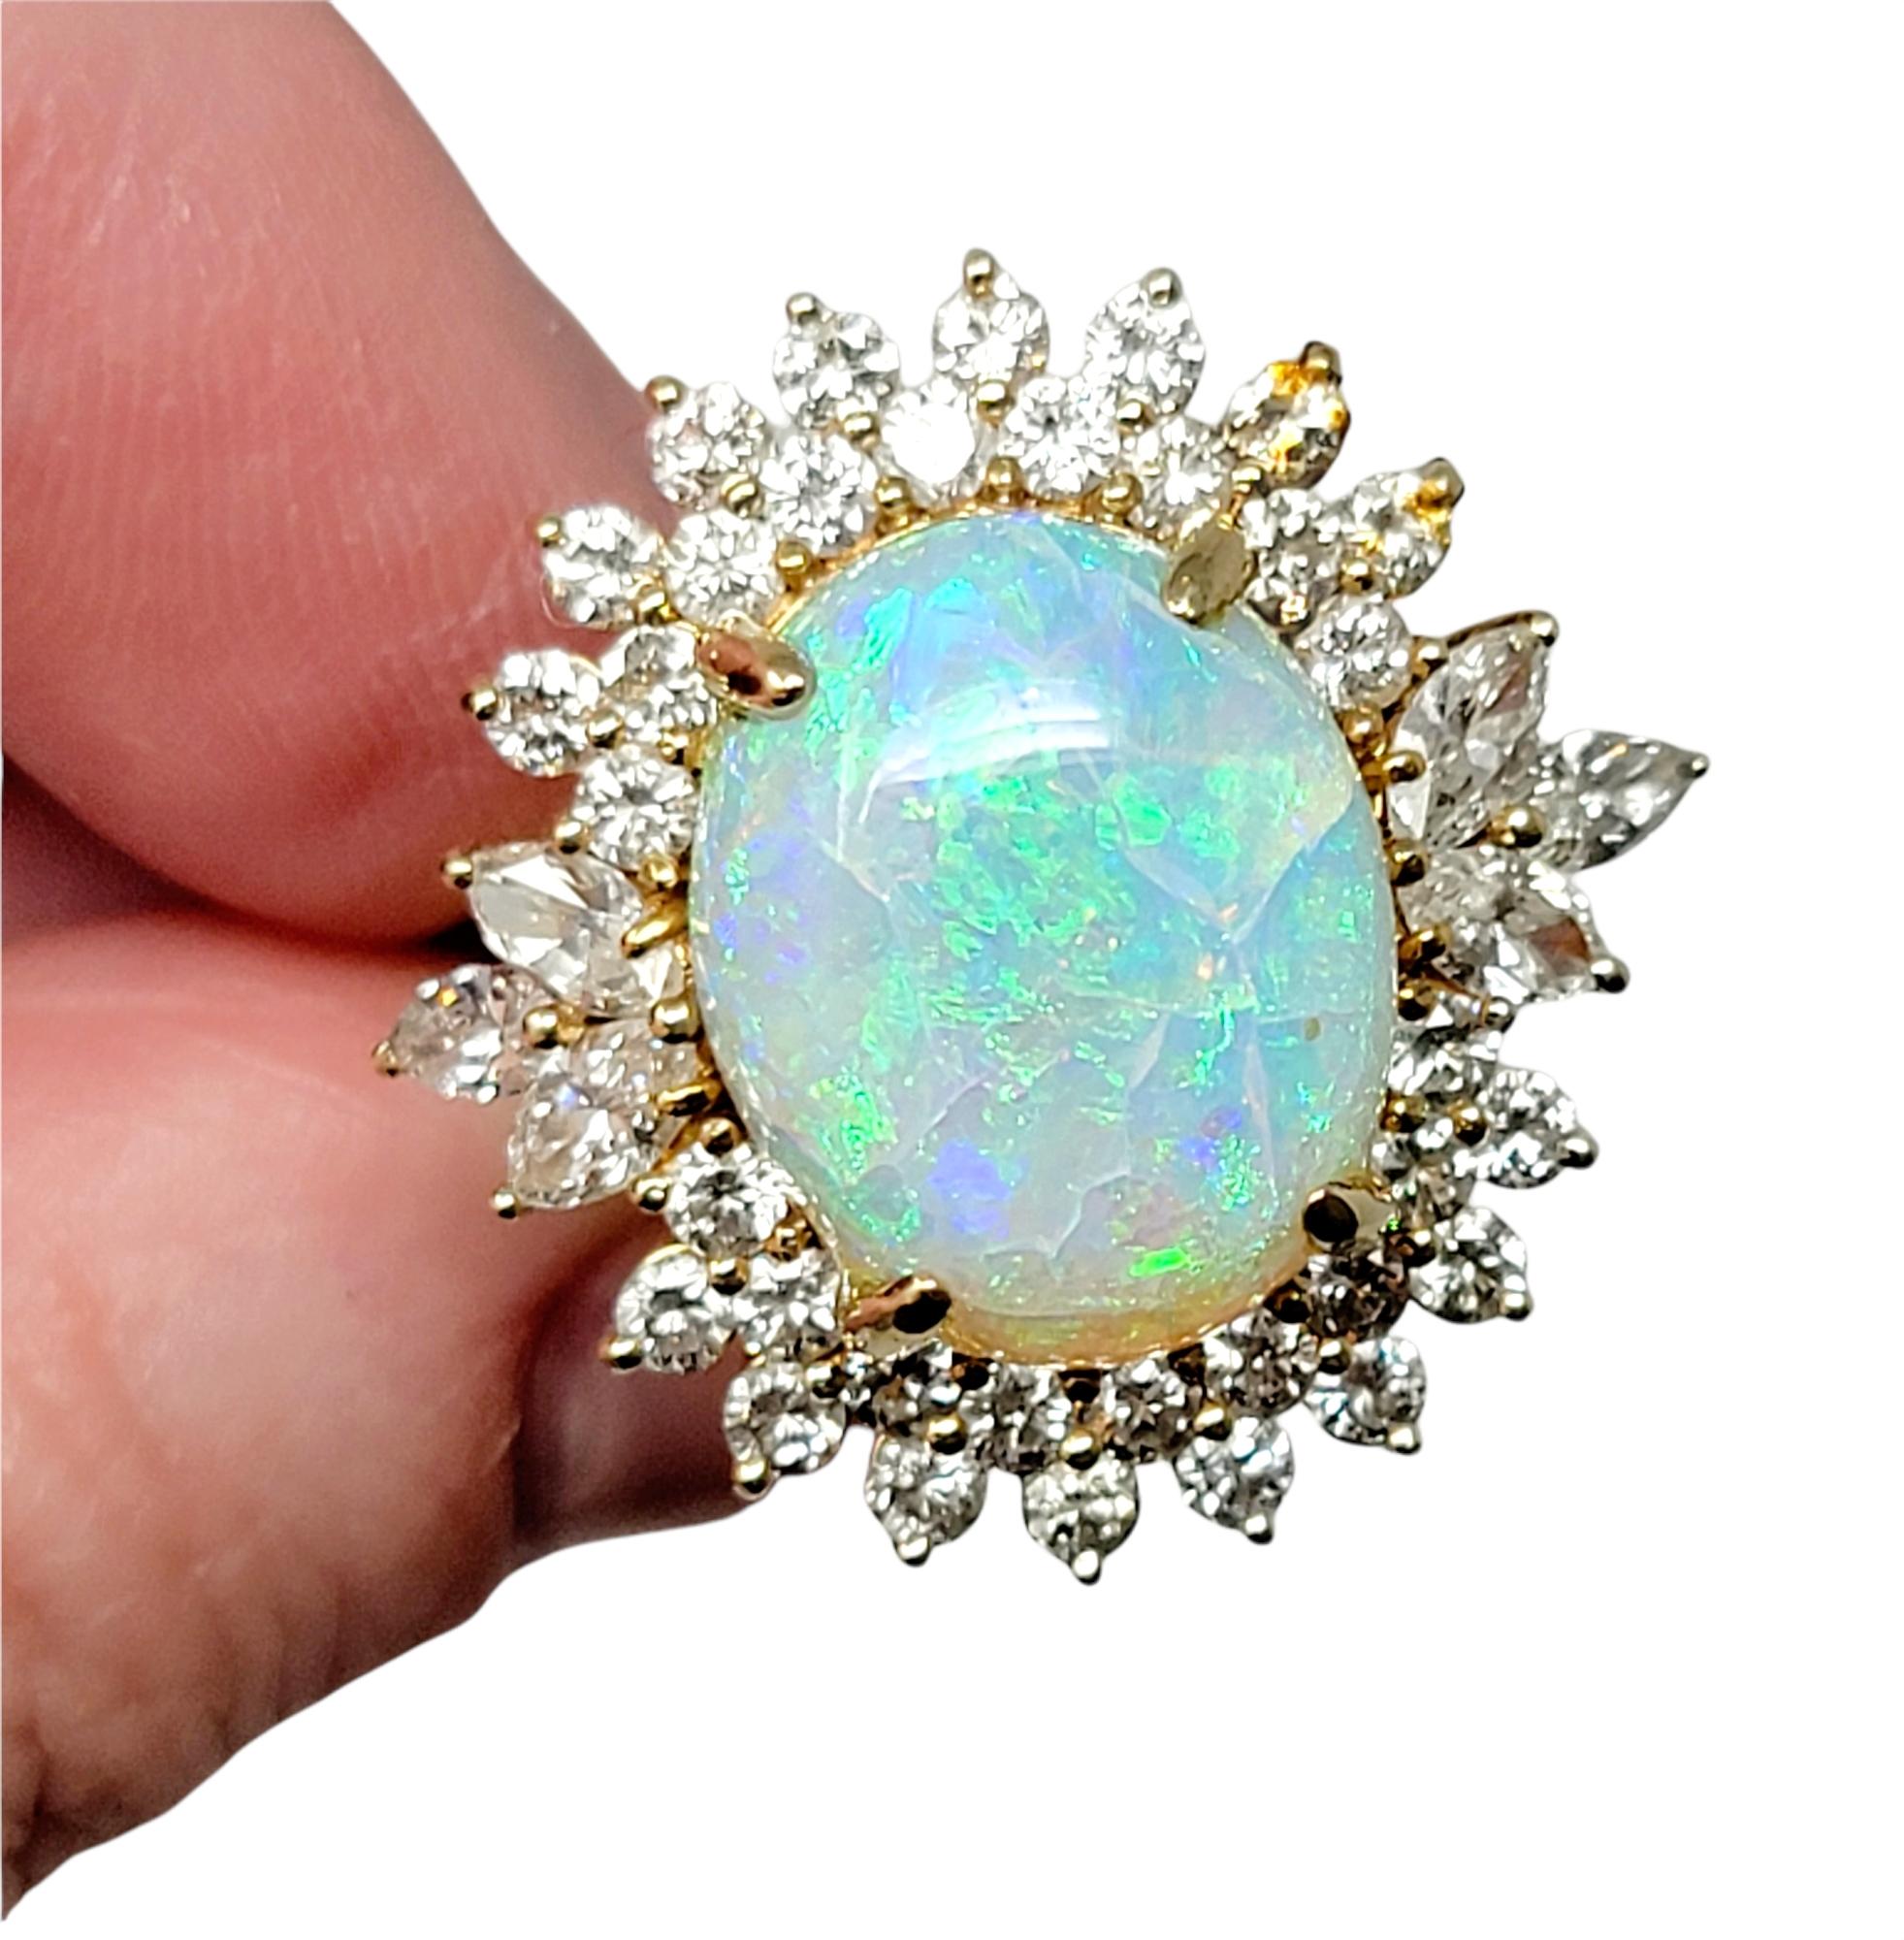 7.55 Carats Total Opal Cabochon and Diamond Halo Ring in 14 Karat Yellow Gold For Sale 8